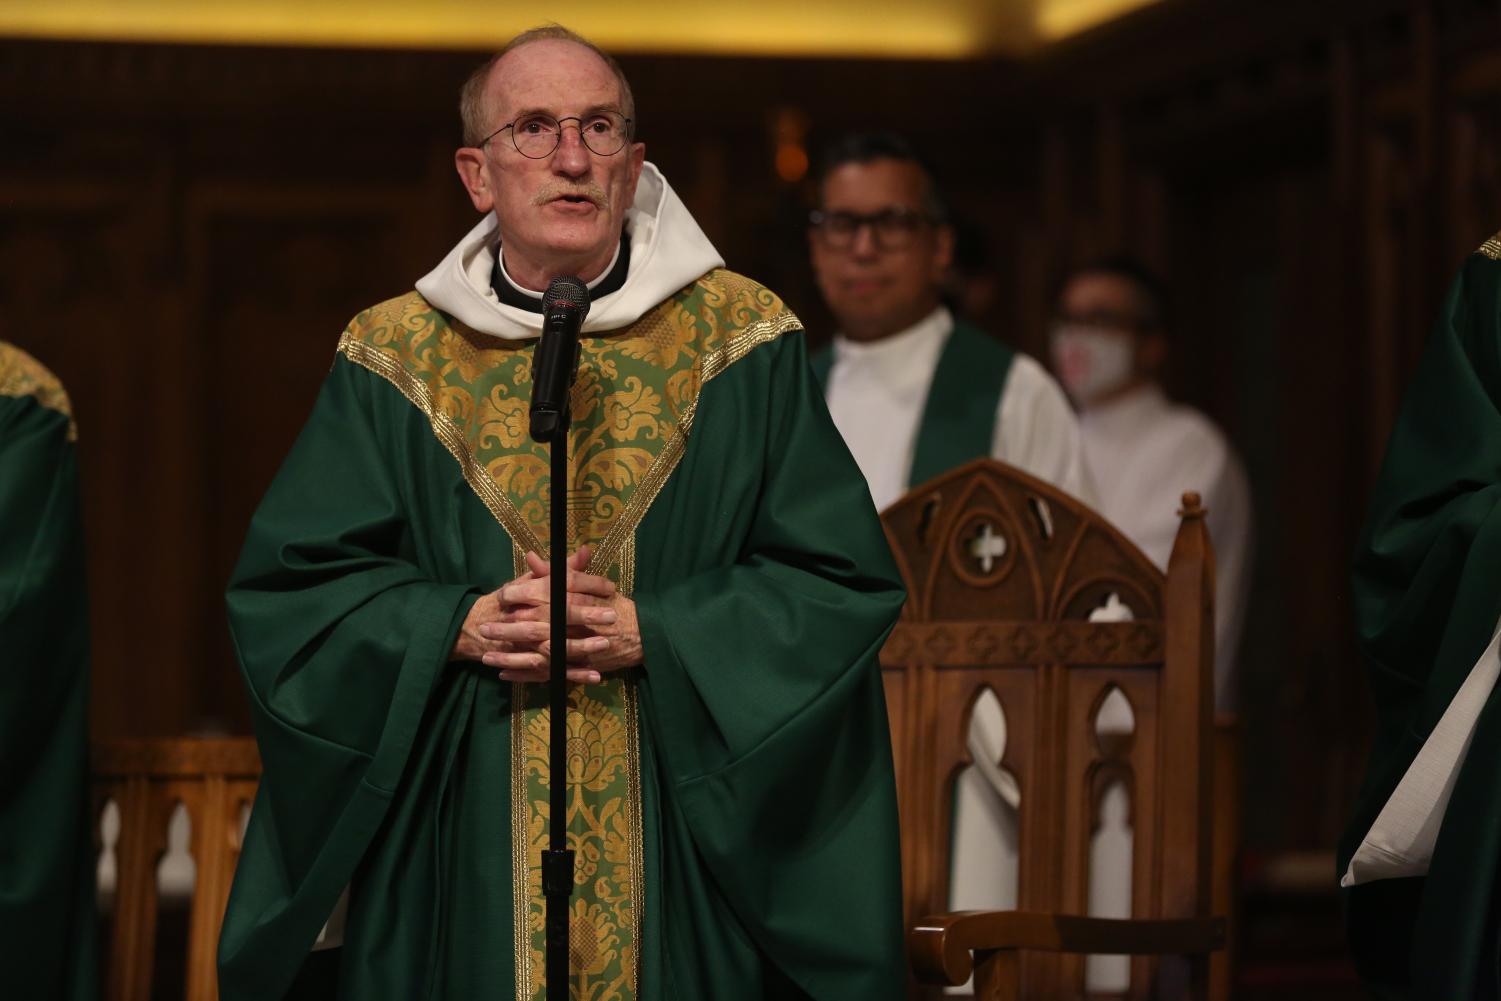 mcshane speaking at a mass in green vestments